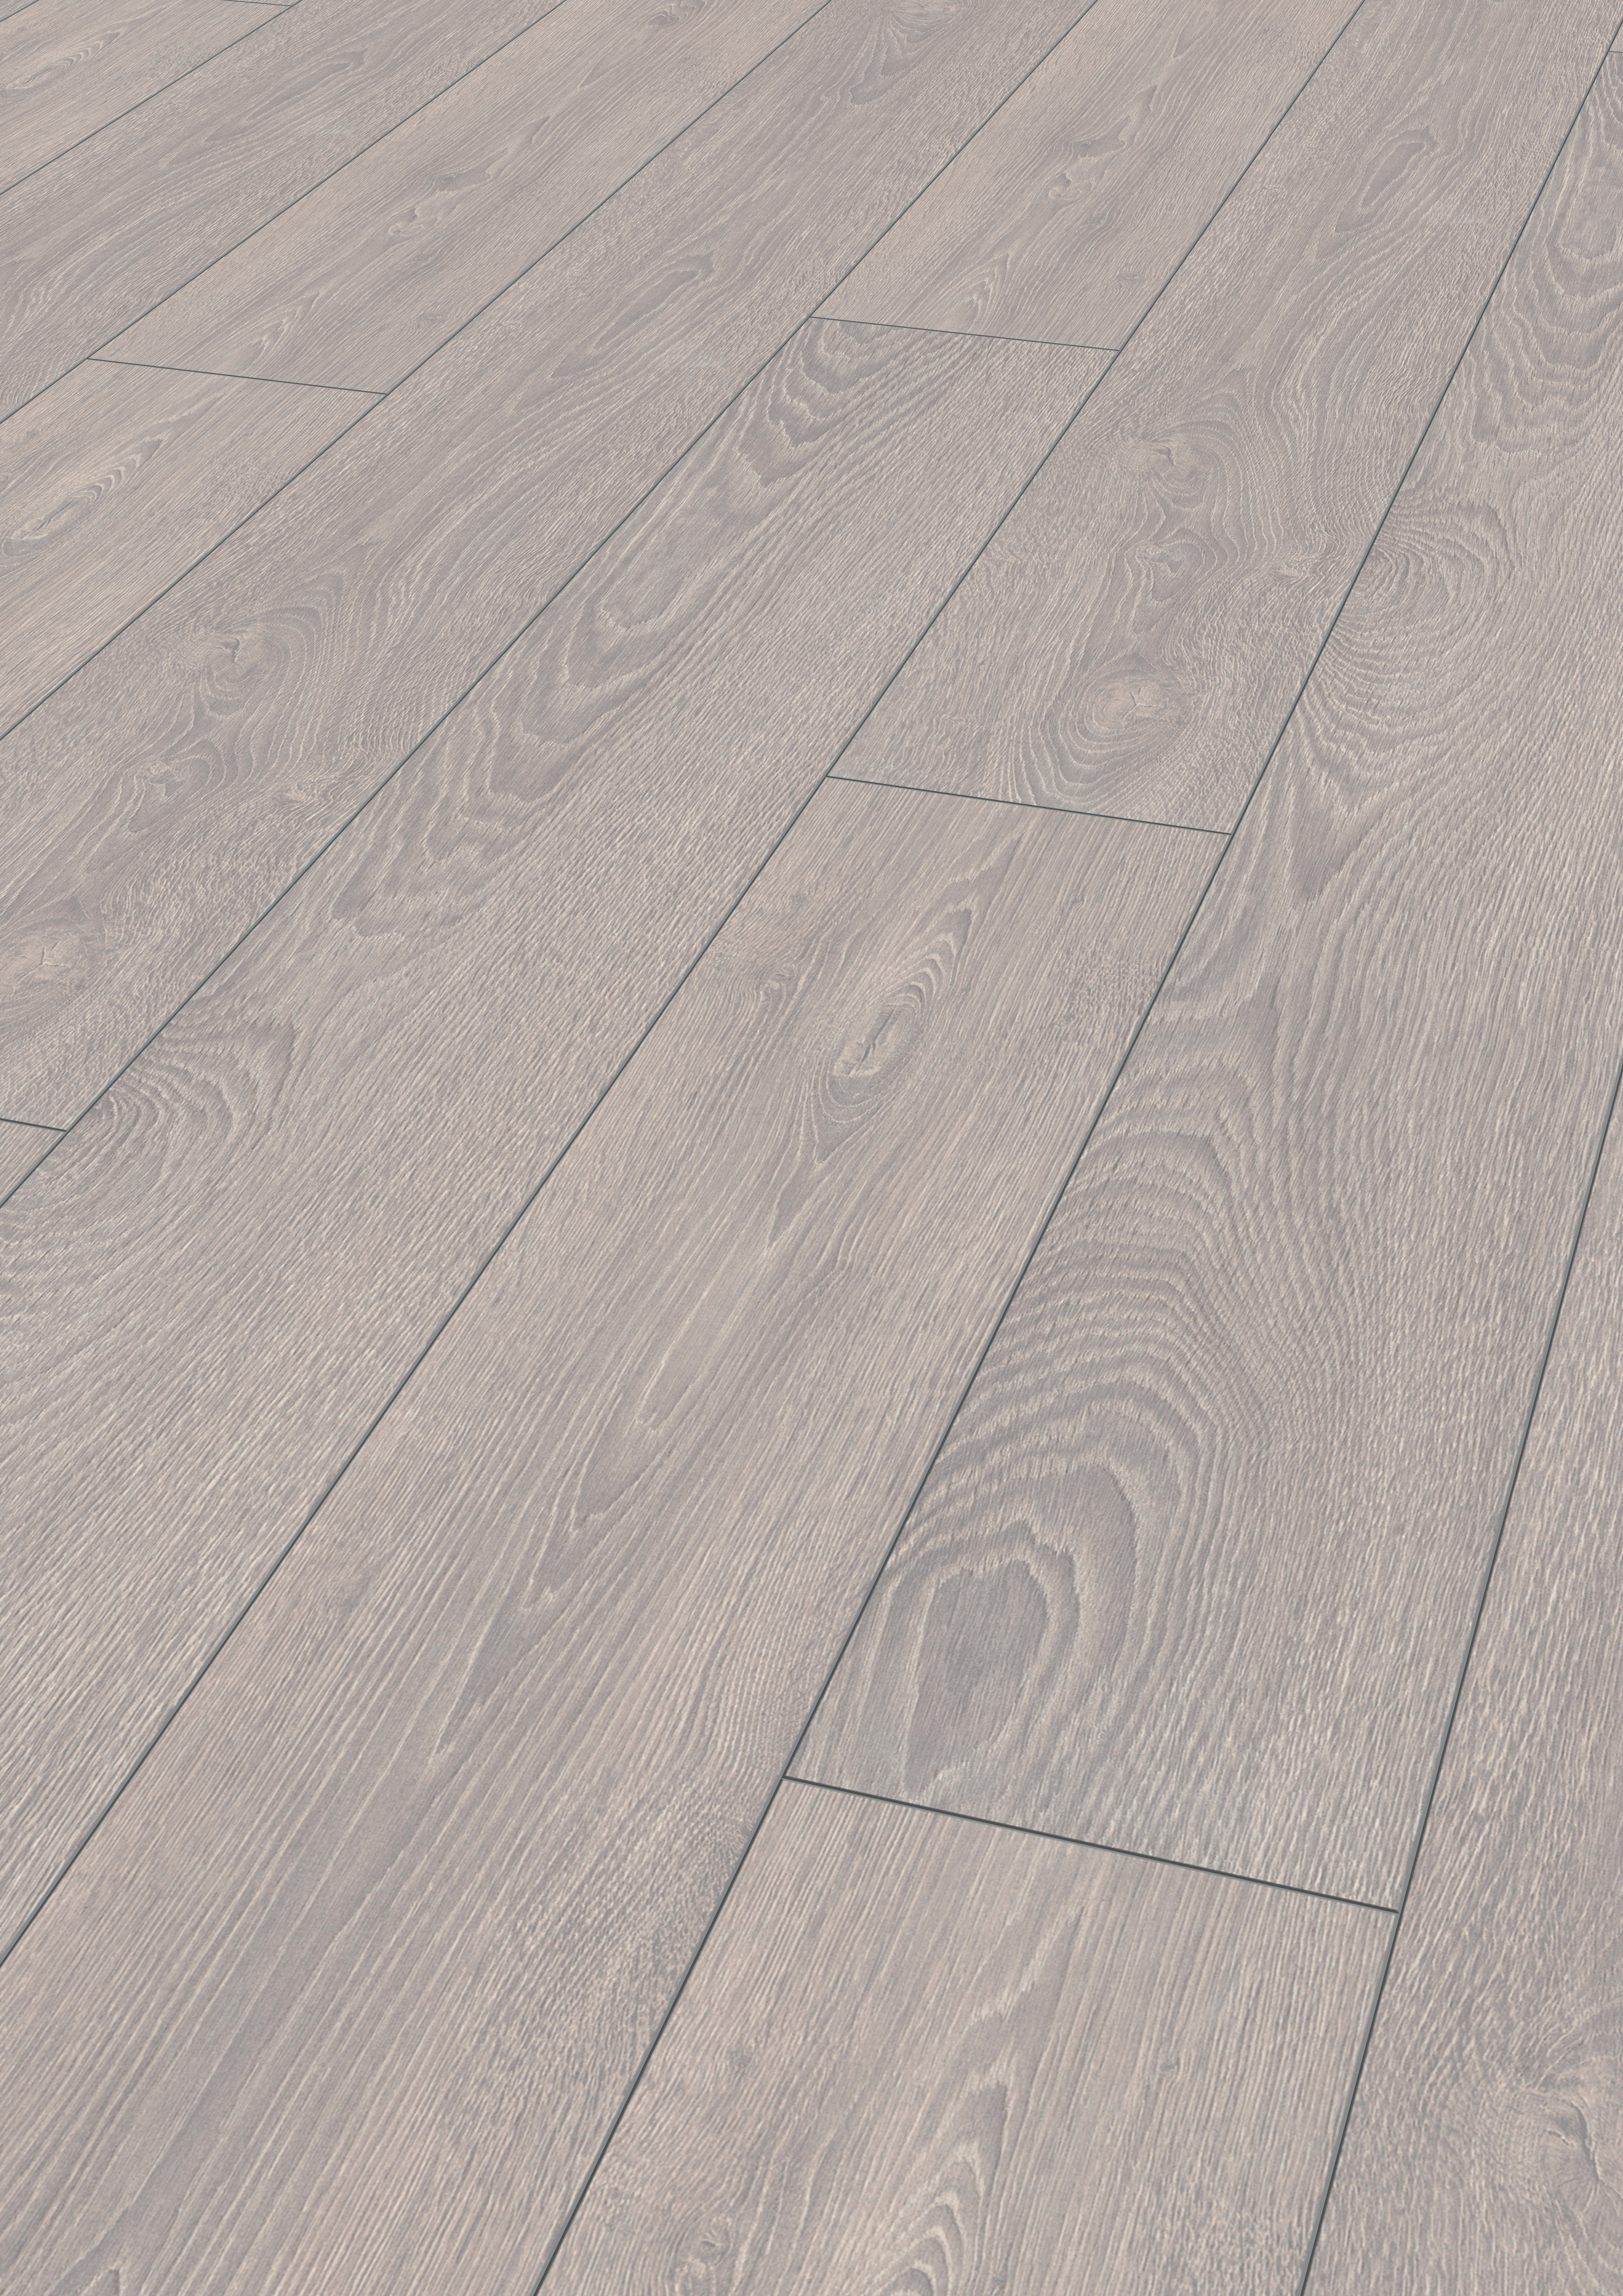 superior hardwood flooring reviews of mammut laminate flooring in country house plank style kronotex pertaining to download picture